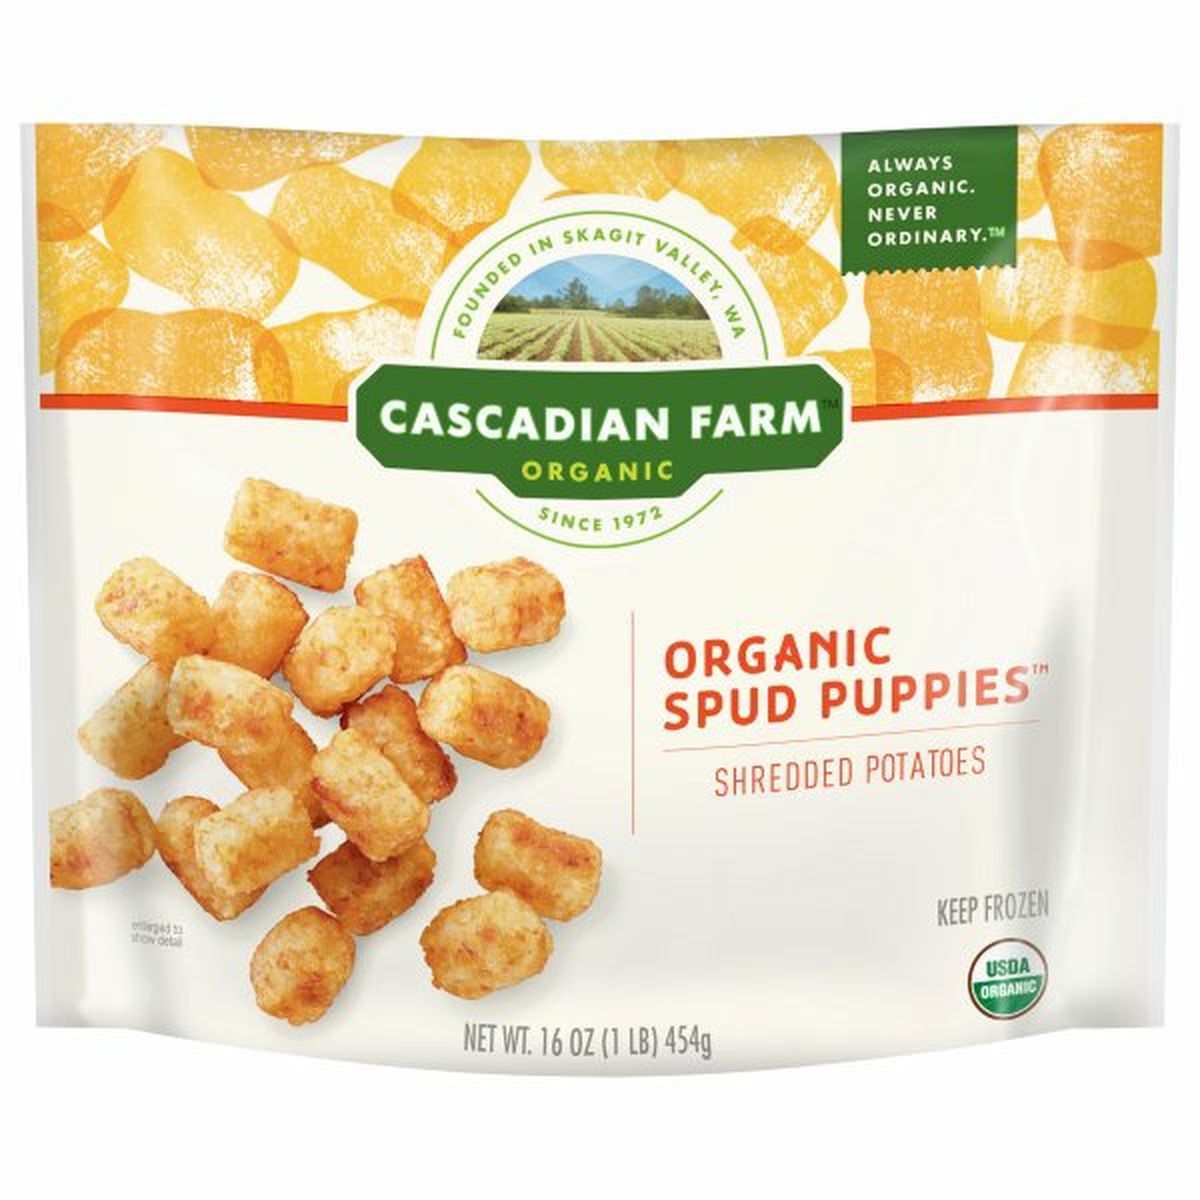 Calories in Cascadian Farm Spud Puppies, Organic